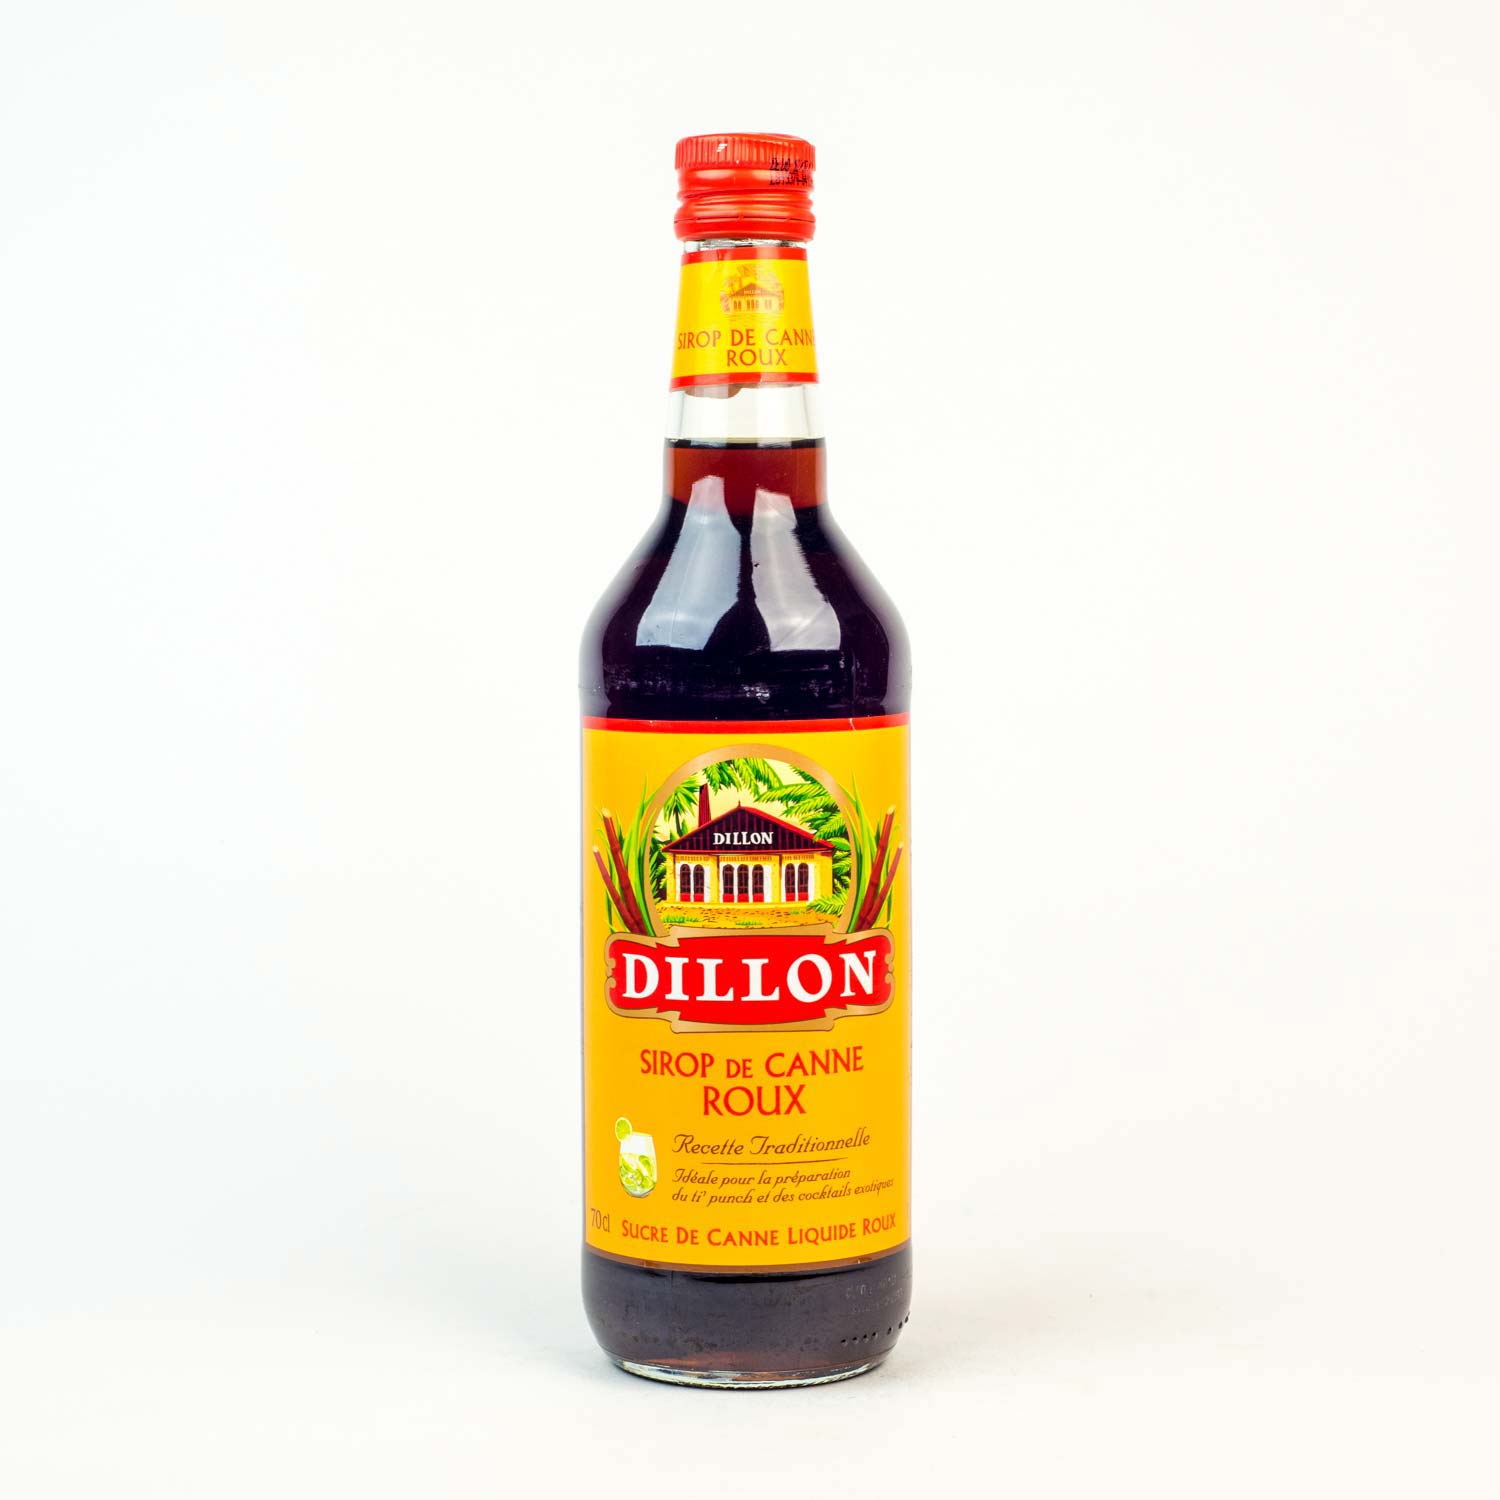 http://www.mayrand.ca/globalassets/mayrand/catalog-mayrand/epicerie/23552_sucre-de-canne-liquide-roux-70-cl-dillon.jpg